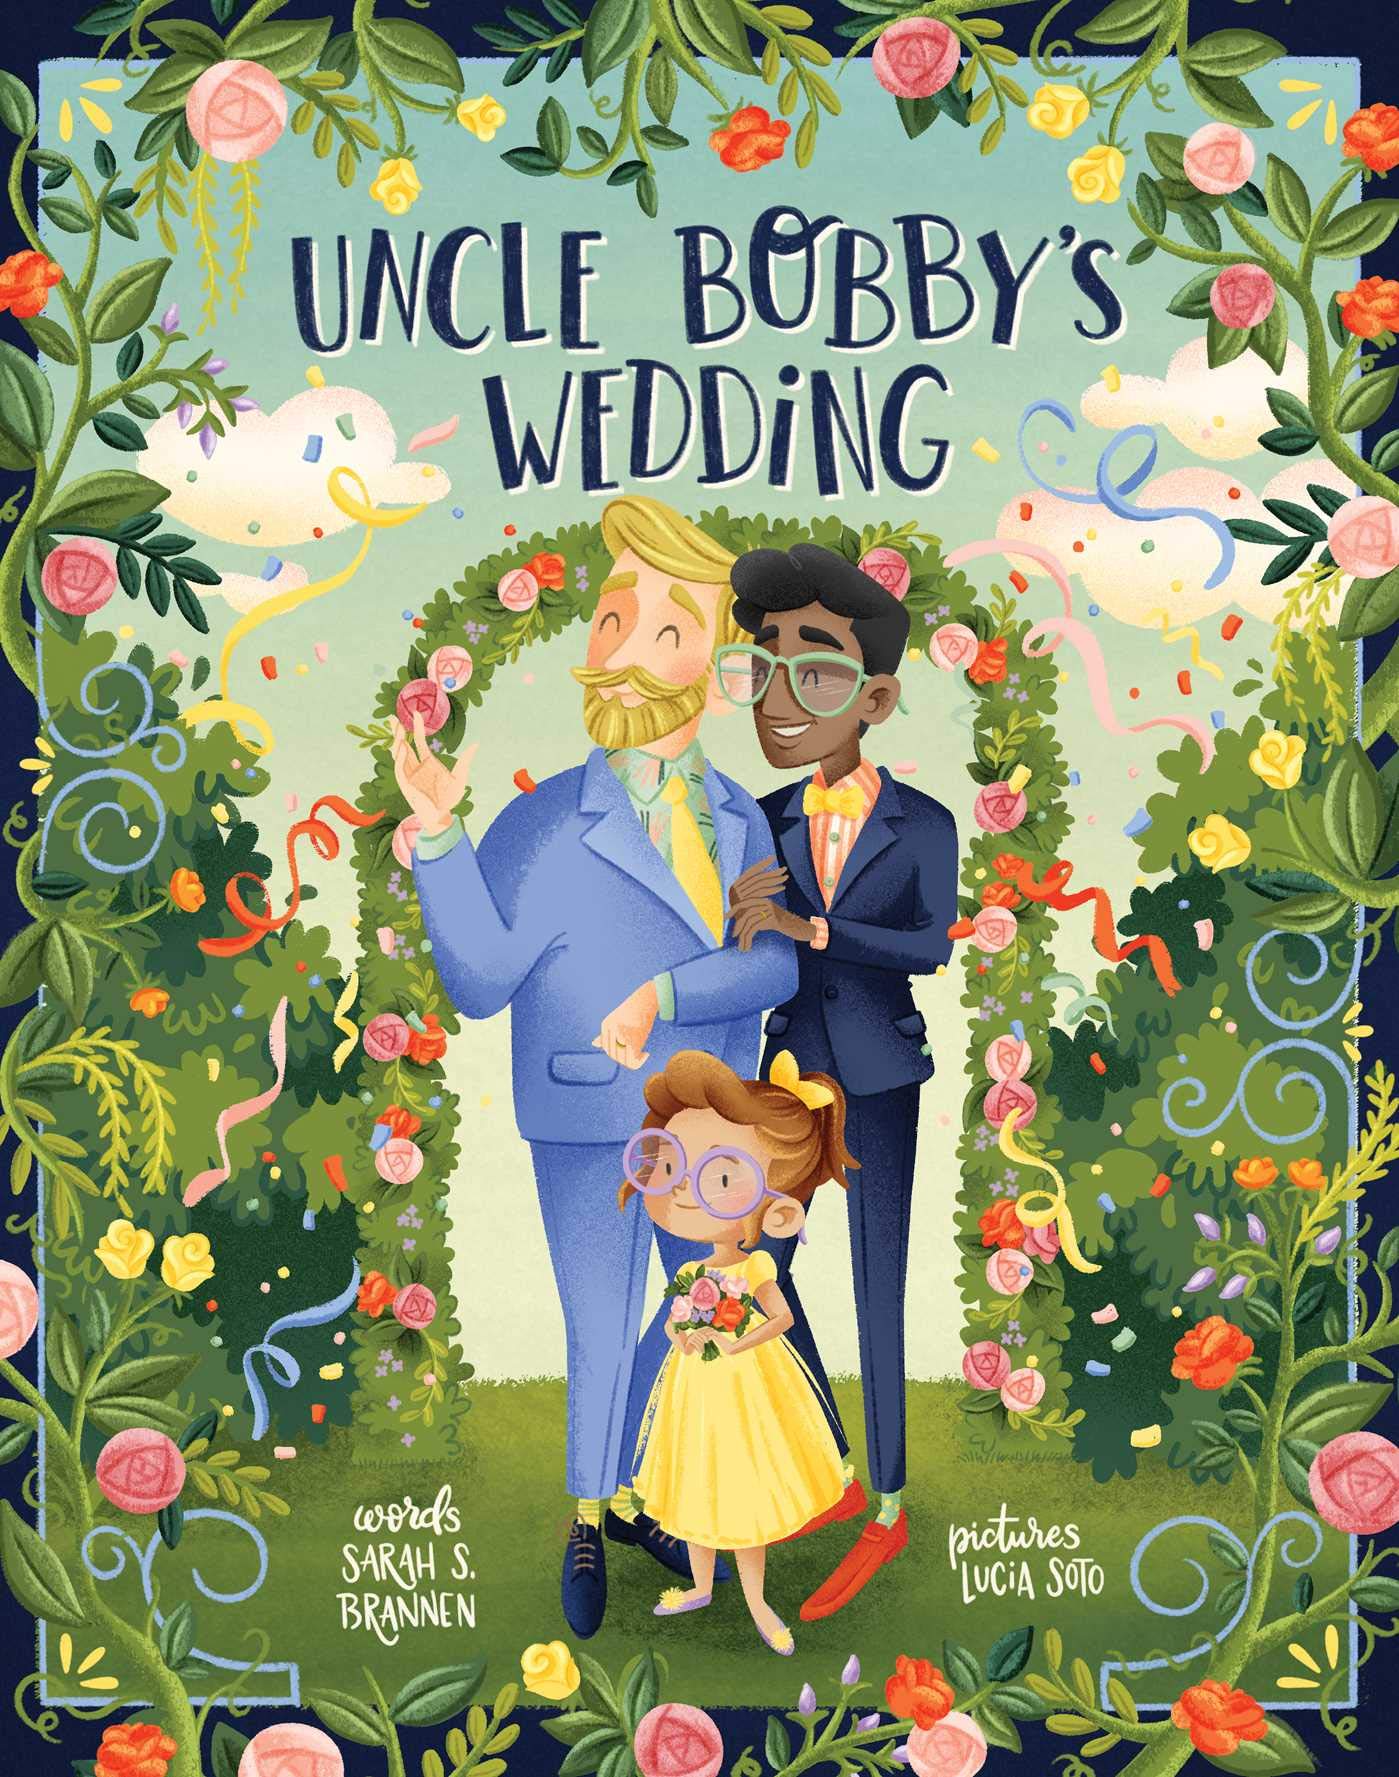 The cover of the book "Uncle Bobby's Wedding" features a little girl in a yellow dress standing with two newlywed grooms in blue suits. They are surrounded by a colorful flower garden as confetti falls around them.